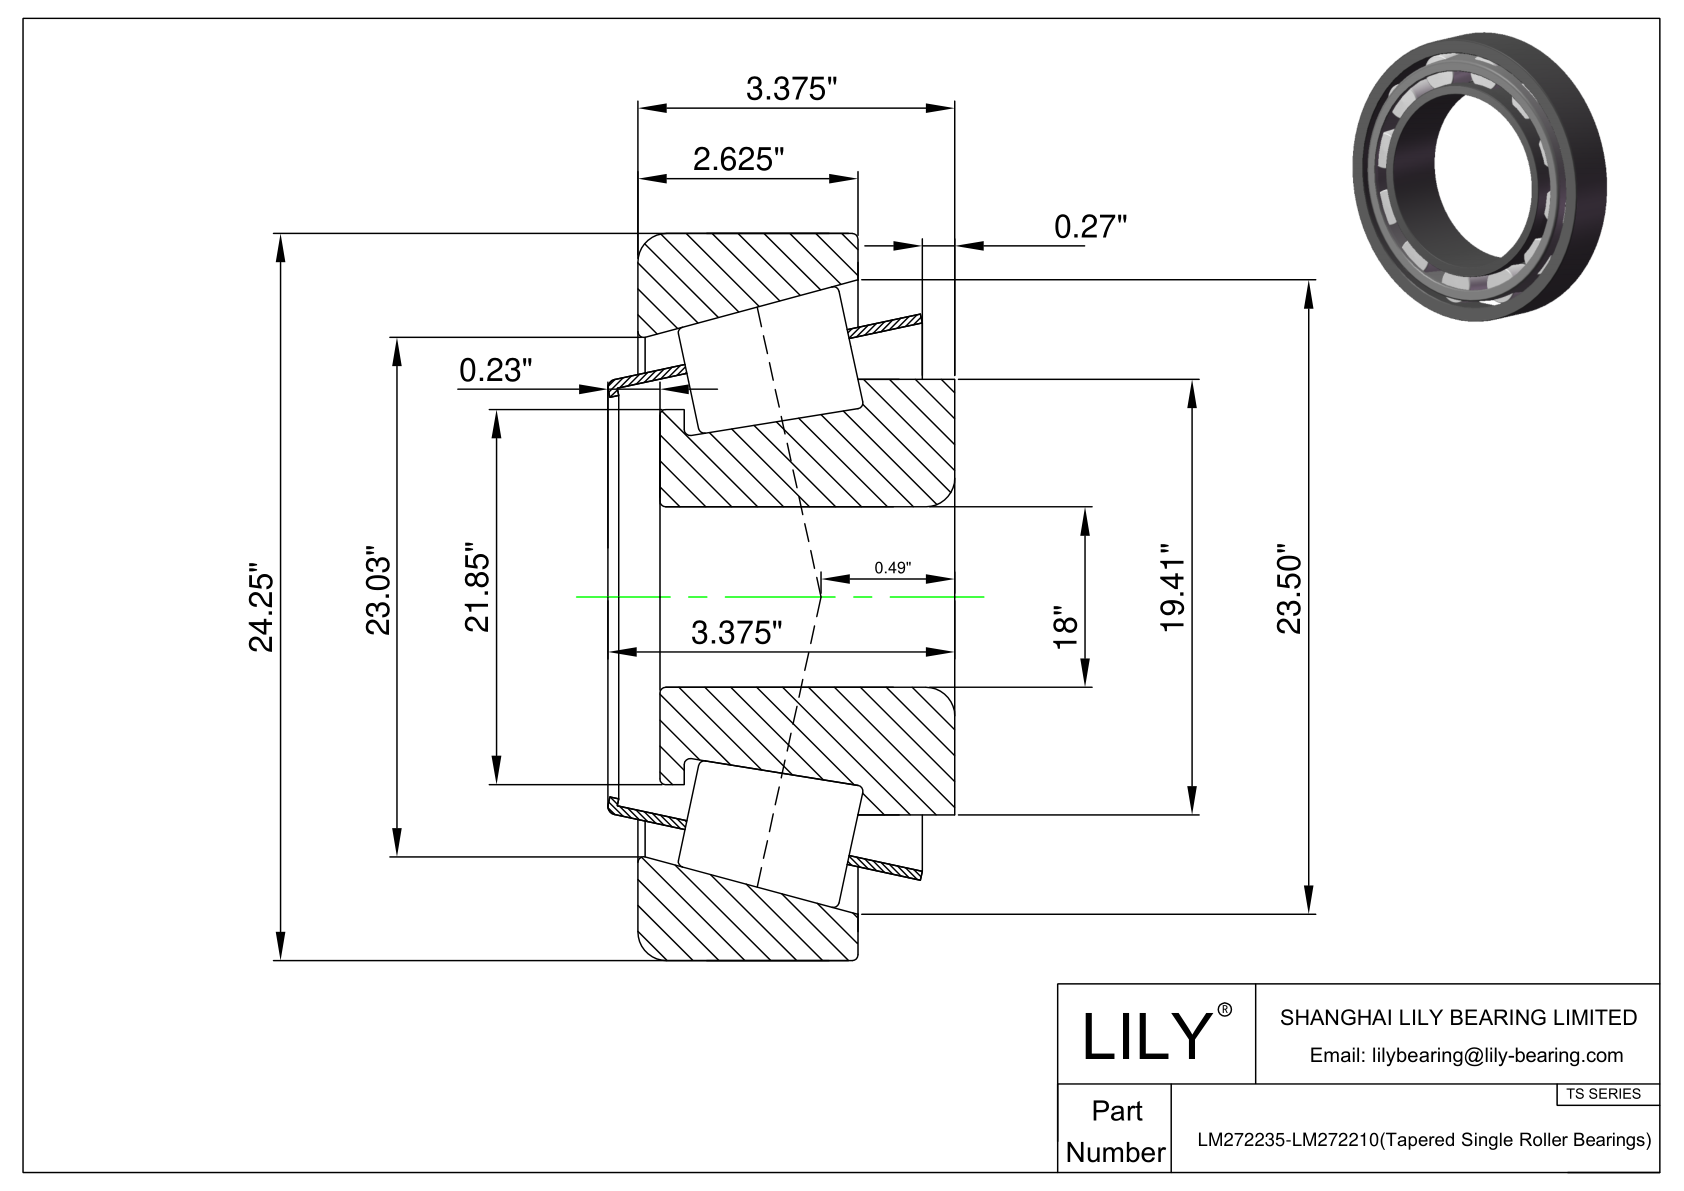 LM272235-LM272210 TS (Tapered Single Roller Bearings) (Imperial) cad drawing